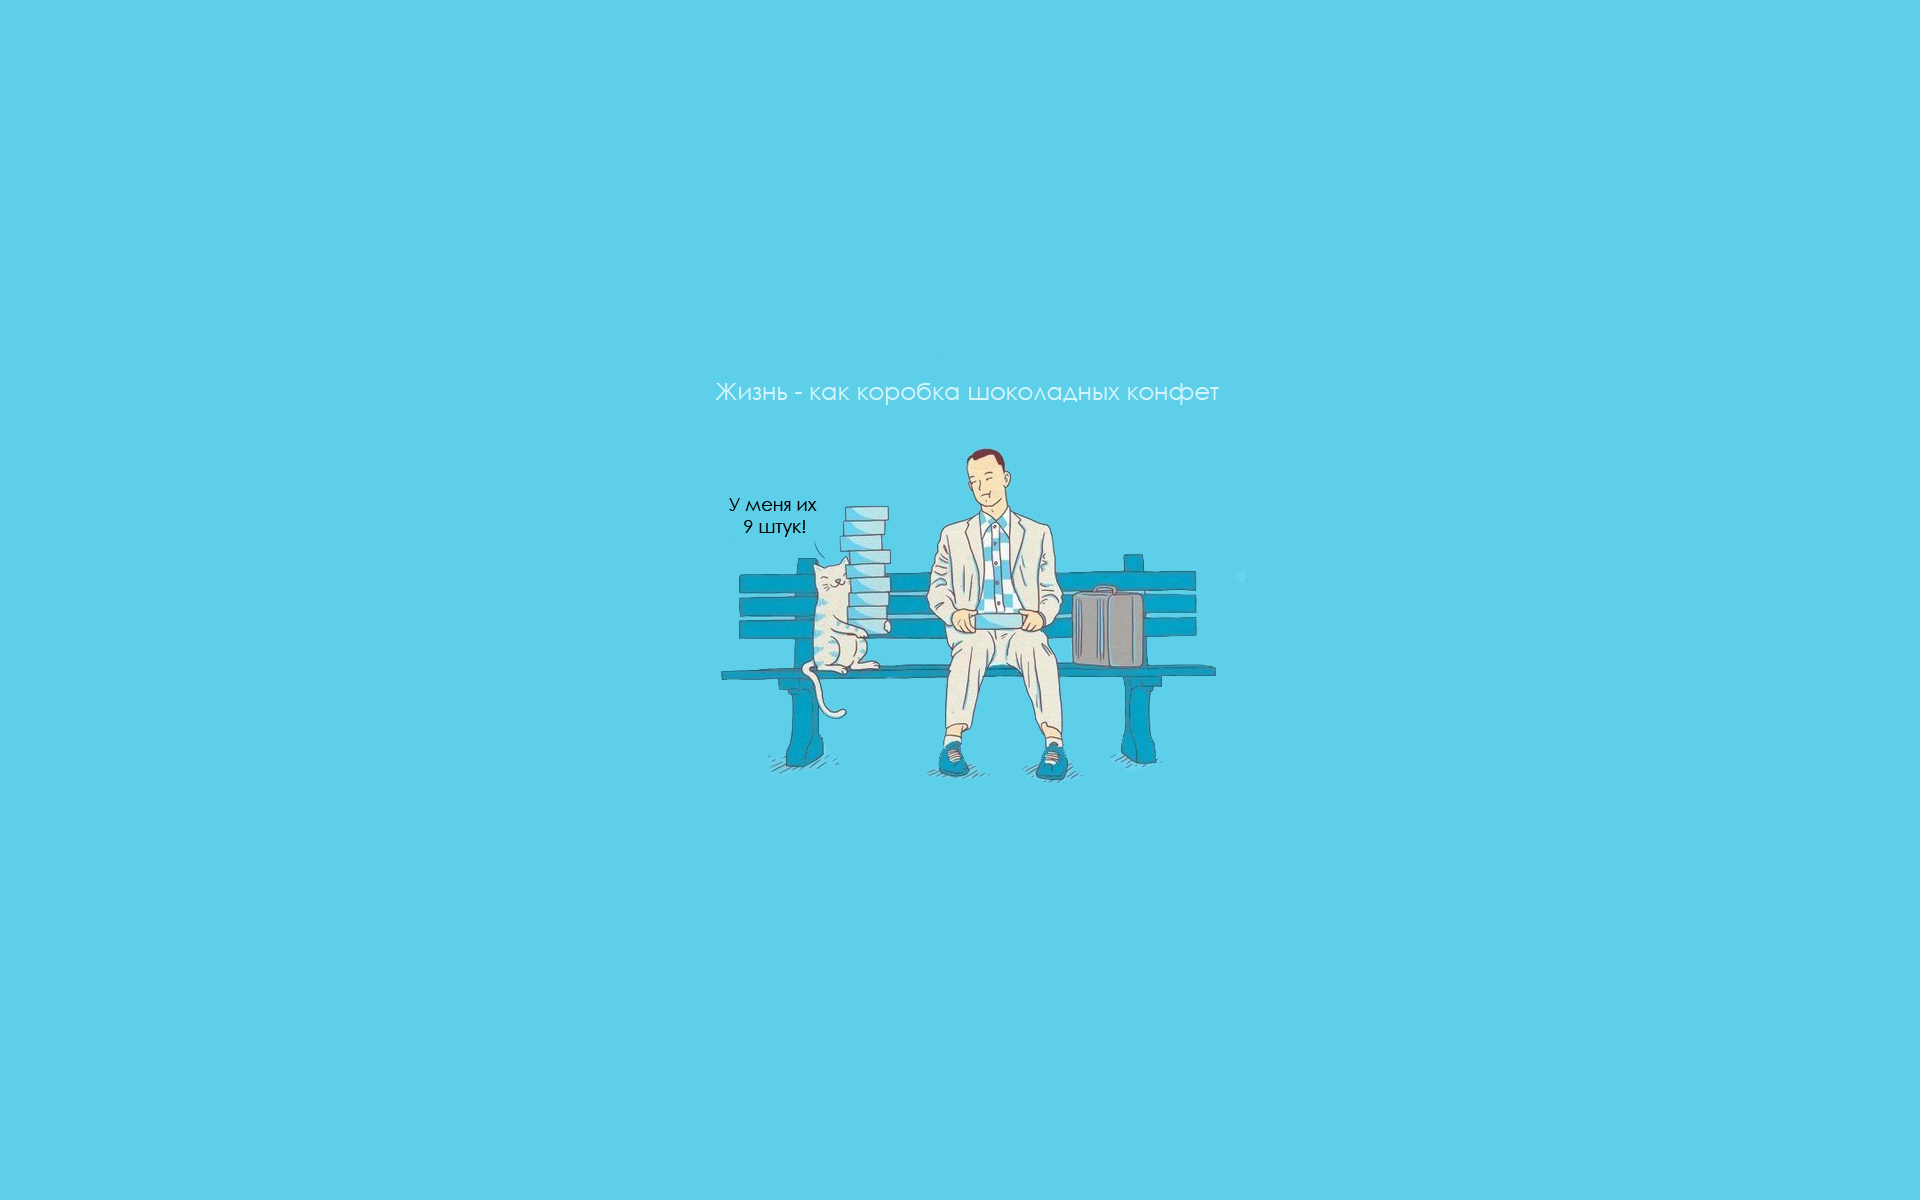 Blue Candy Cat Forrest Gump Funny 1920x1200